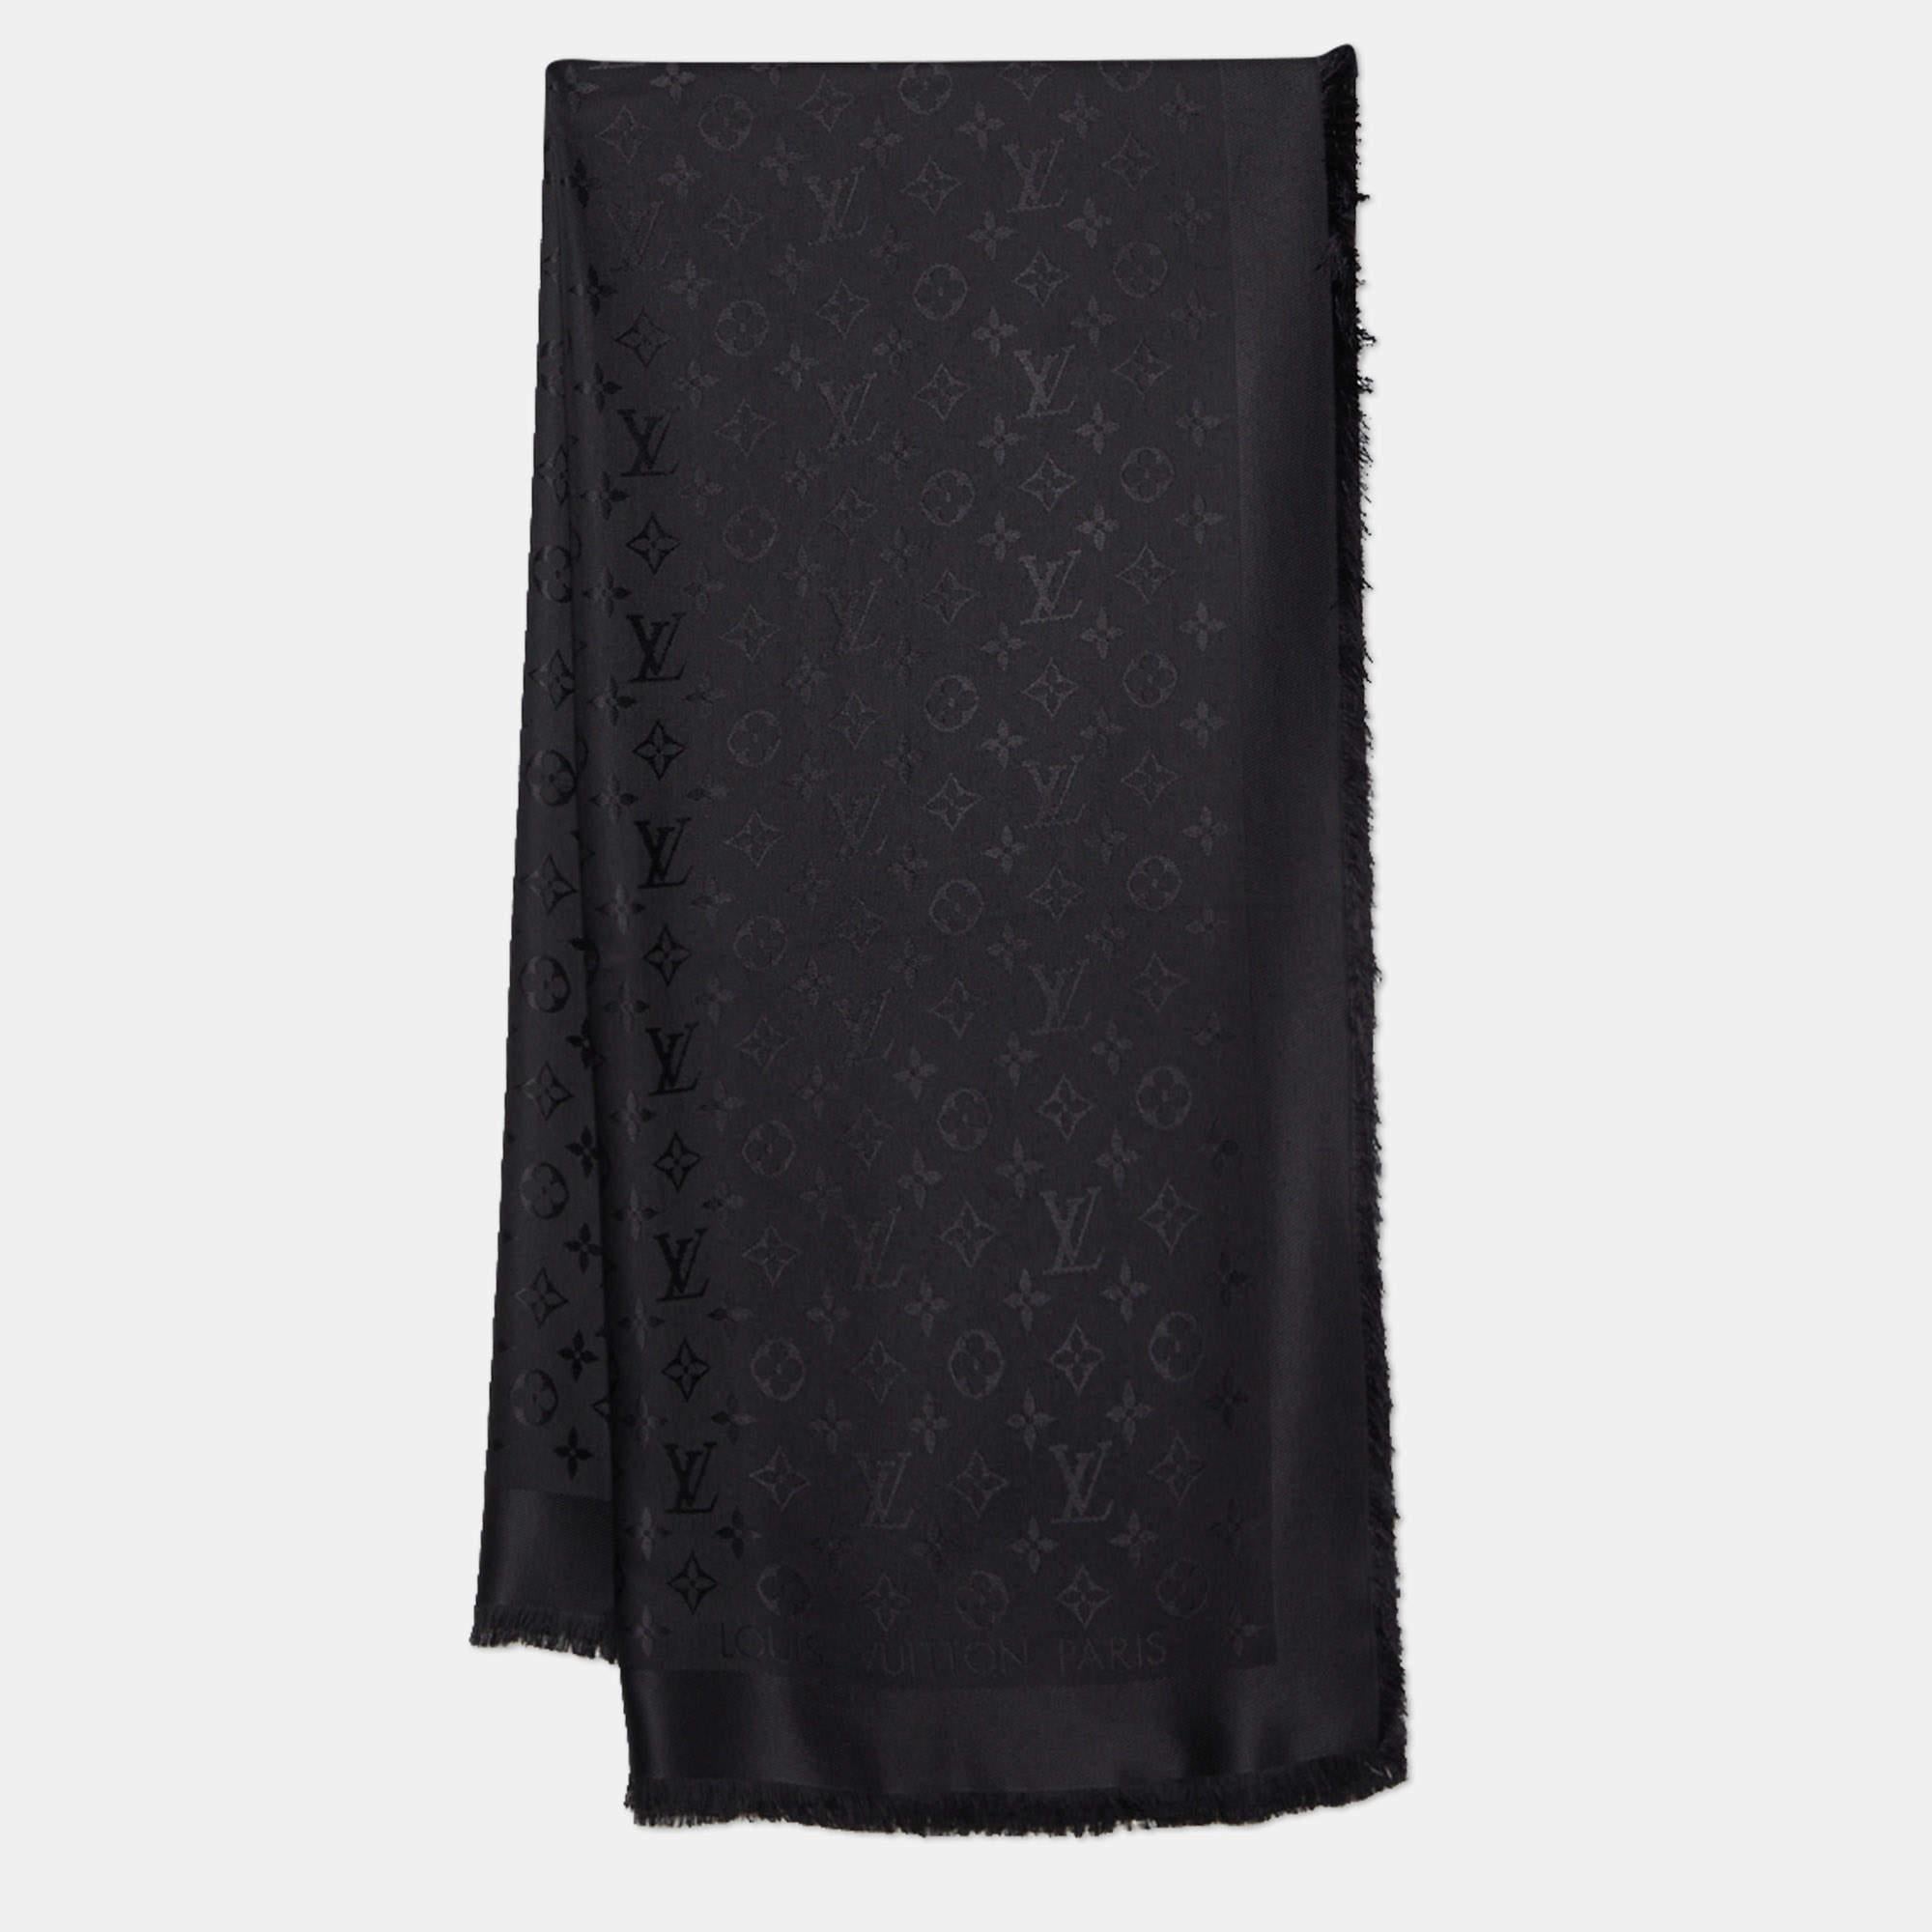 For days when you want your accessory to essay your style, this Louis Vuitton Classique Monogram shawl is perfect. It carries a gorgeous shade with the signature Monogram all over it. This shawl is created from quality fabrics for a luxurious feel